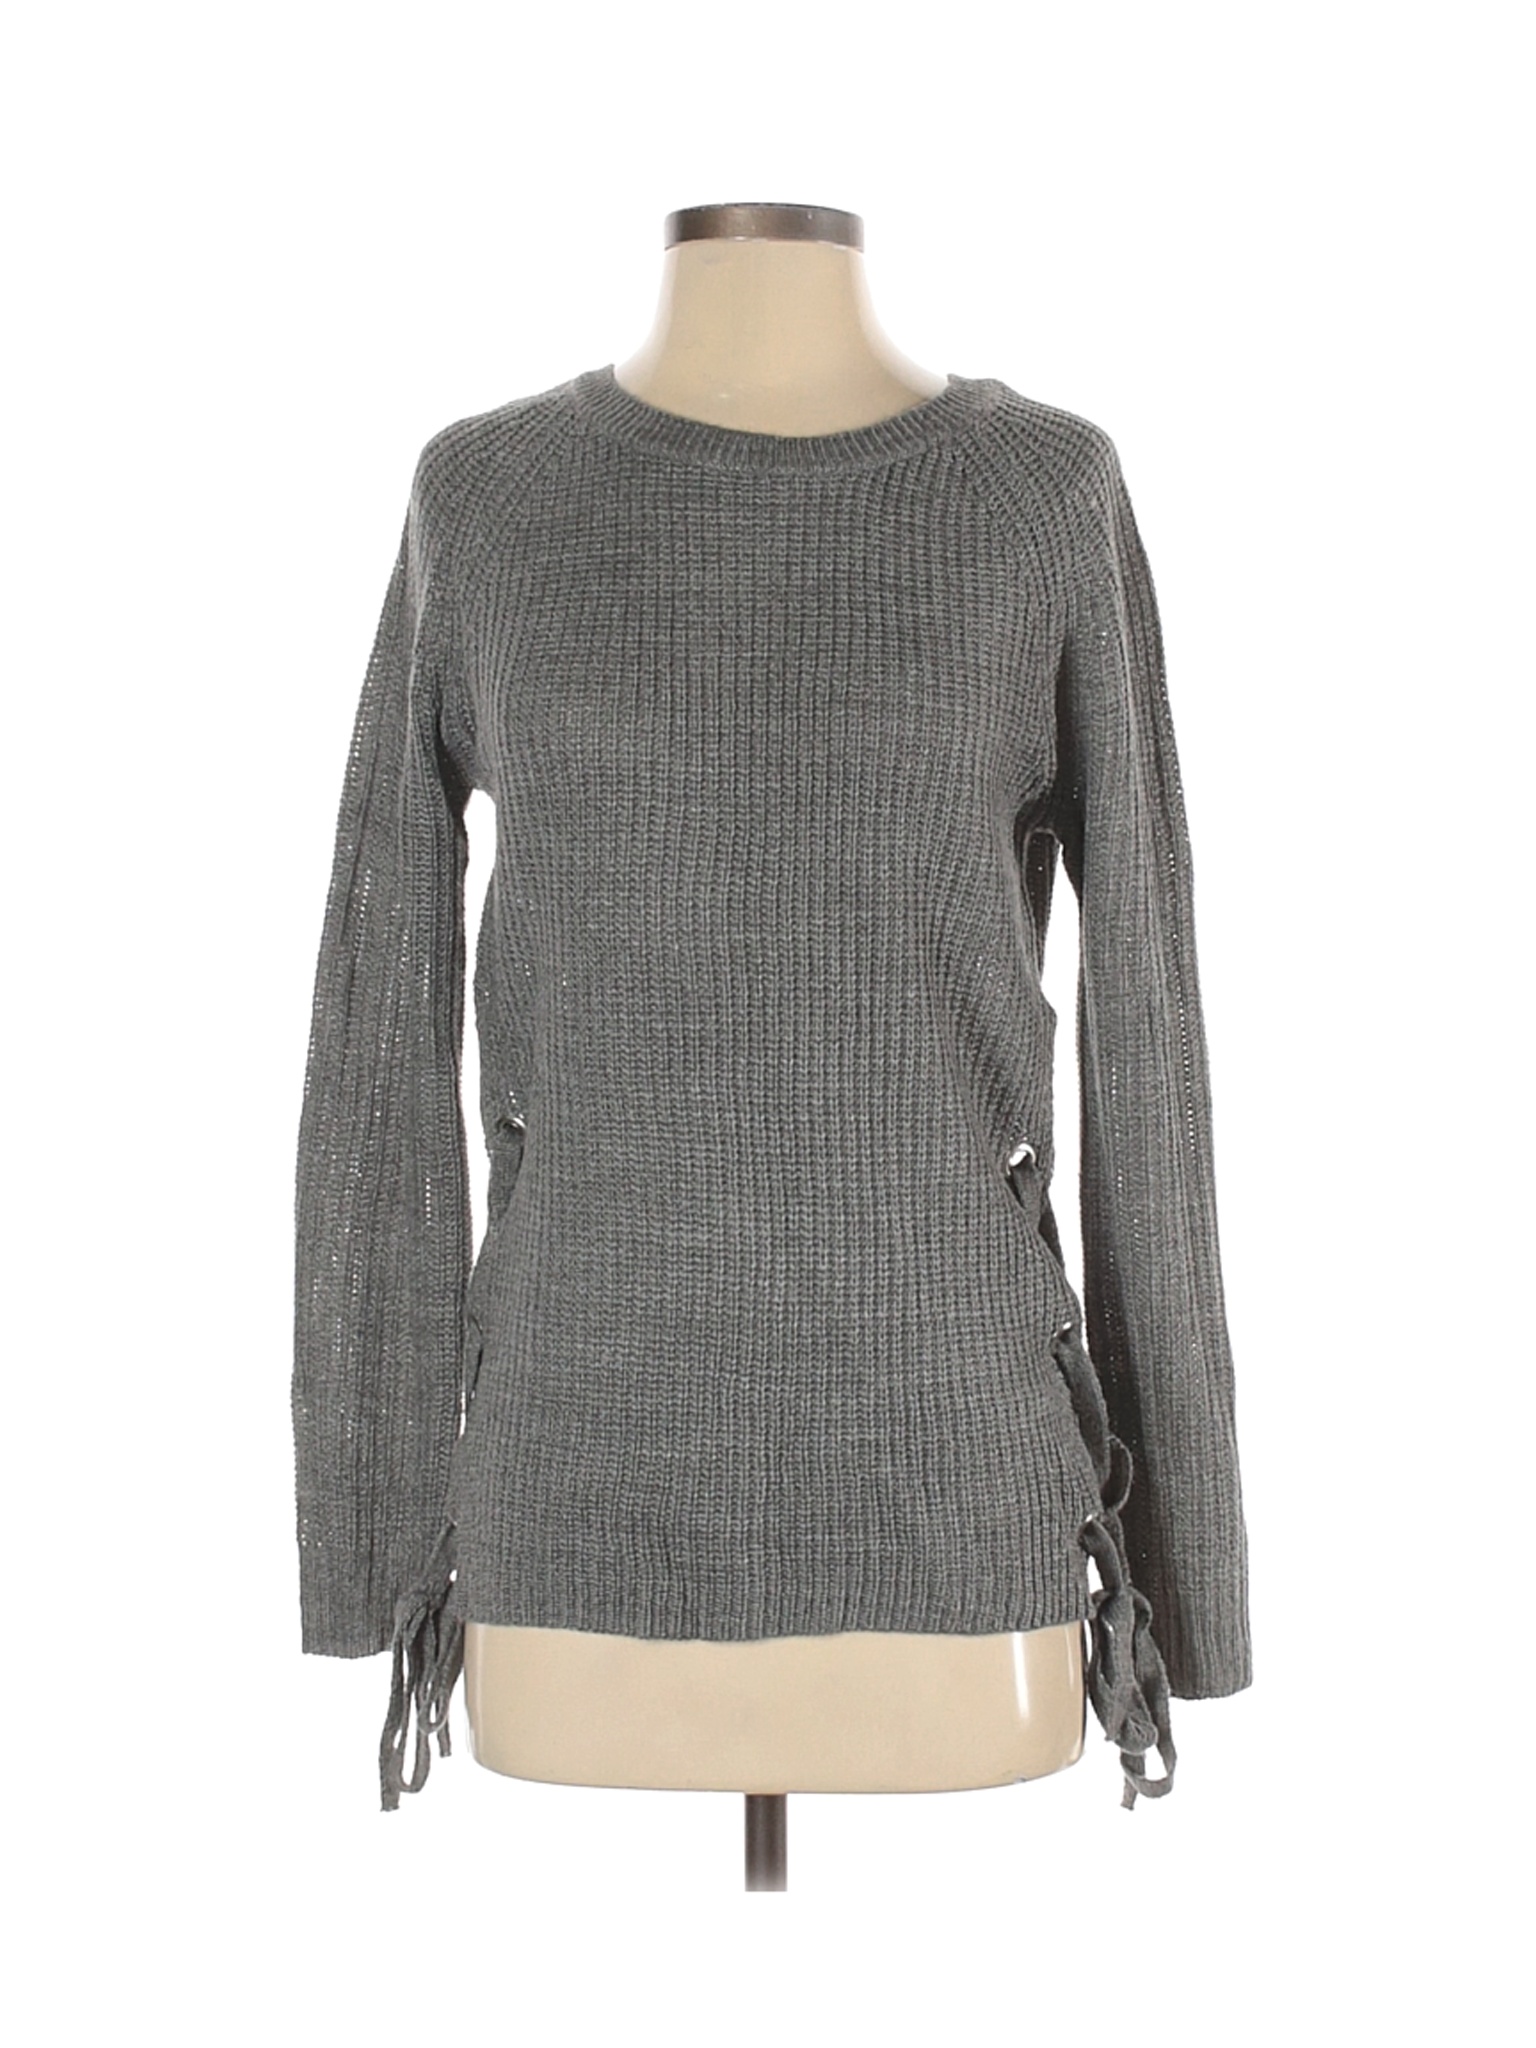 Ambiance Apparel Women Gray Pullover Sweater S | eBay